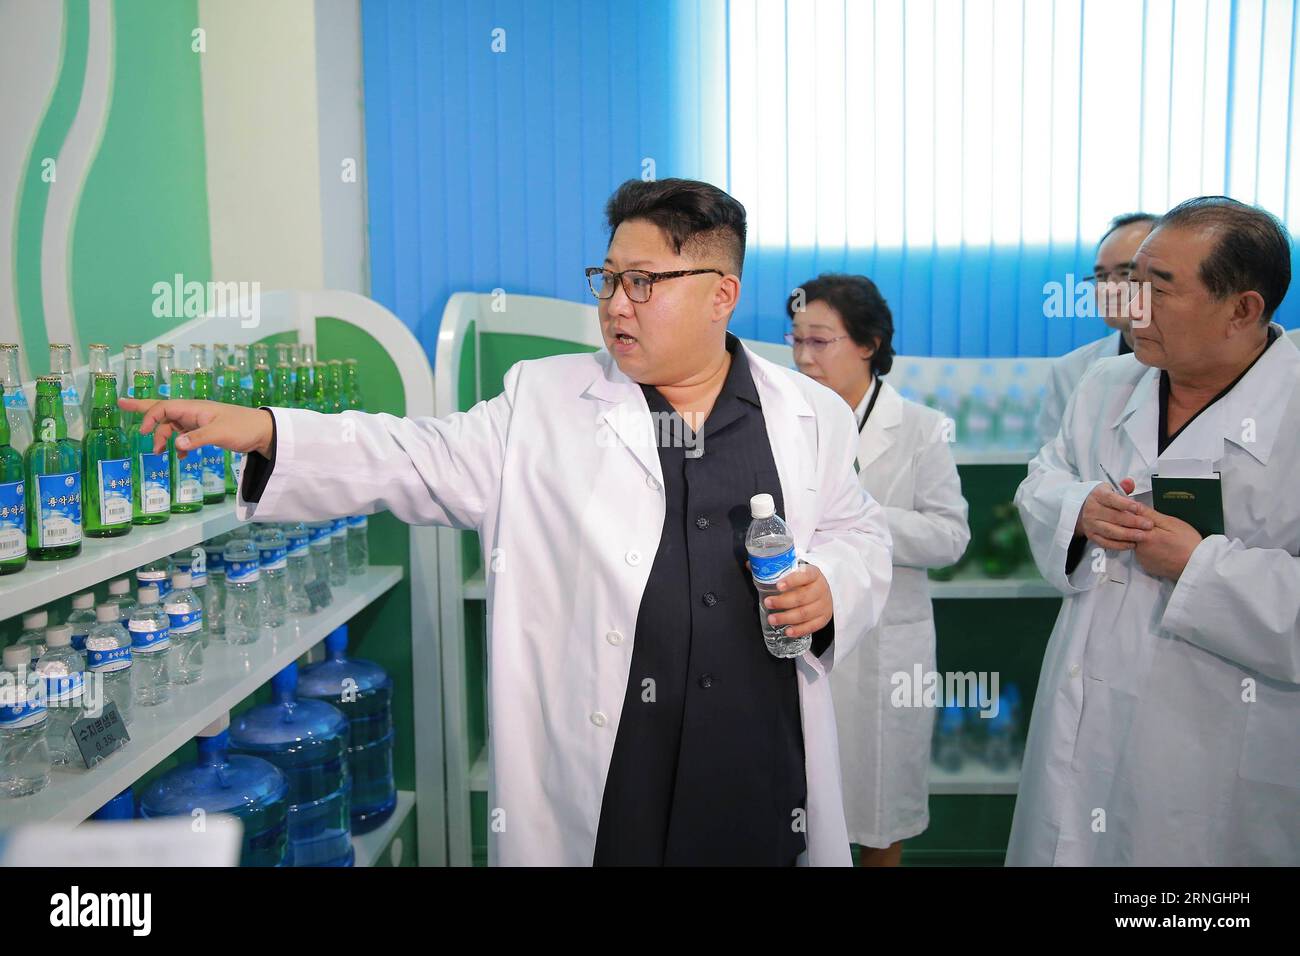 Bilder des Tages Kim Jong Un besucht Mineralwasserfabrik in Pjöngjang (160930) -- PYONGYANG, Sept. 30, 2016 -- Photo provided by Korean Central News Agency () on Sept. 30, 2016 shows top leader of the Democratic People s Republic of Korea (DPRK) Kim Jong Un (1st L) recently providing field guidance to the Ryongaksan Mineral Water Factory. )(zf) DPRK-PYONGYANG-KIM JONG UN-RYONGAKSAN MINERAL WATER FACTORY-GUIDANCE KCNA PUBLICATIONxNOTxINxCHN   Images the Day Kim Jong UN attended  in Pyongyang  Pyongyang Sept 30 2016 Photo provided by Korean Central News Agency ON Sept 30 2016 Shows Top Leader of Stock Photo